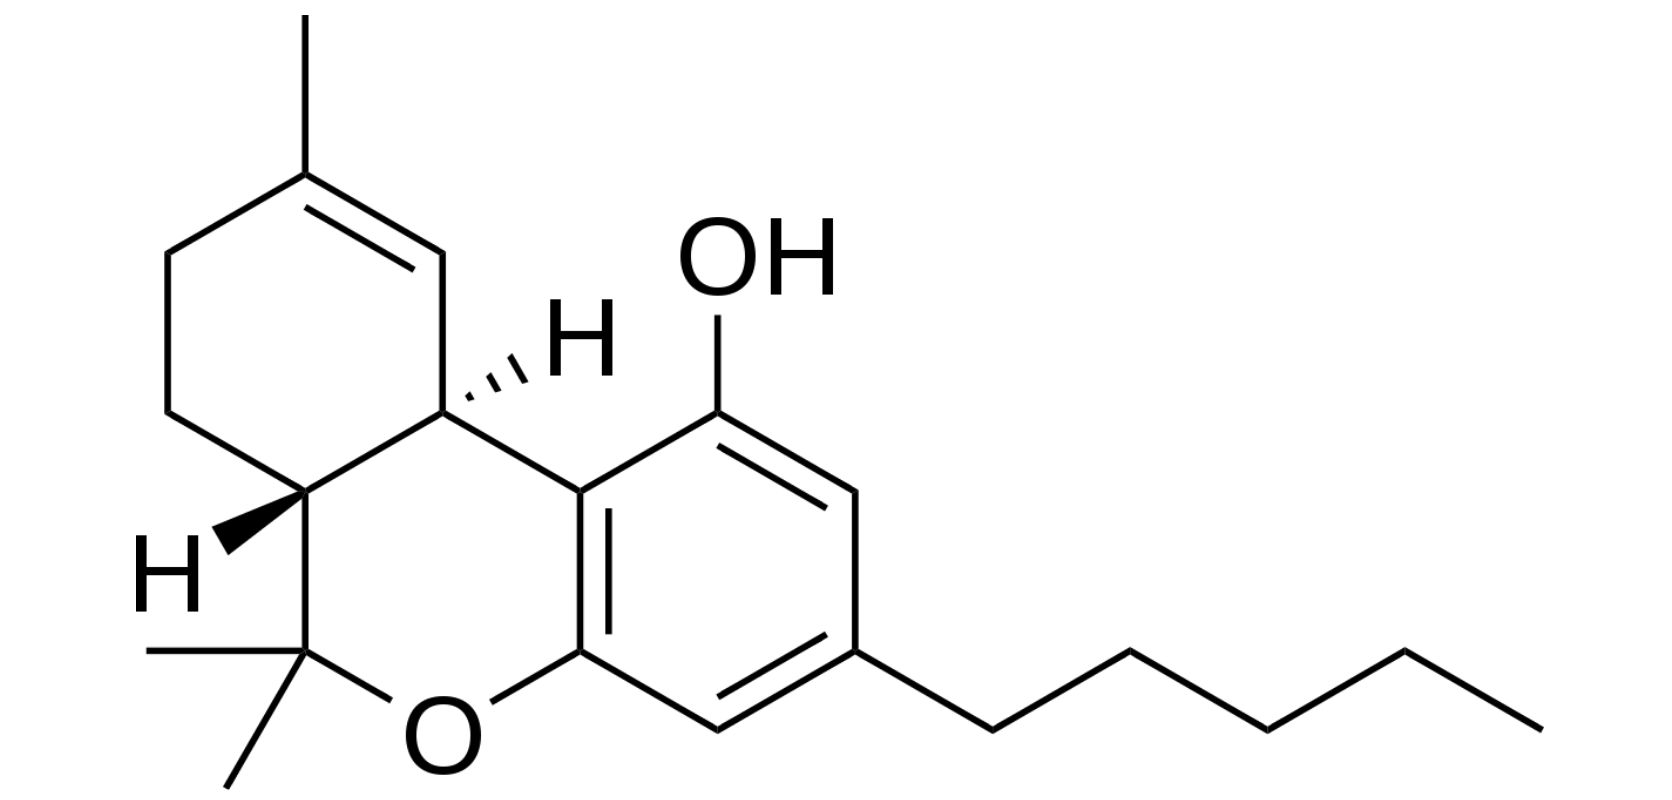 Short for tetrahydrocannabinol, THC is a chemical compound present in the marijuana plant. 